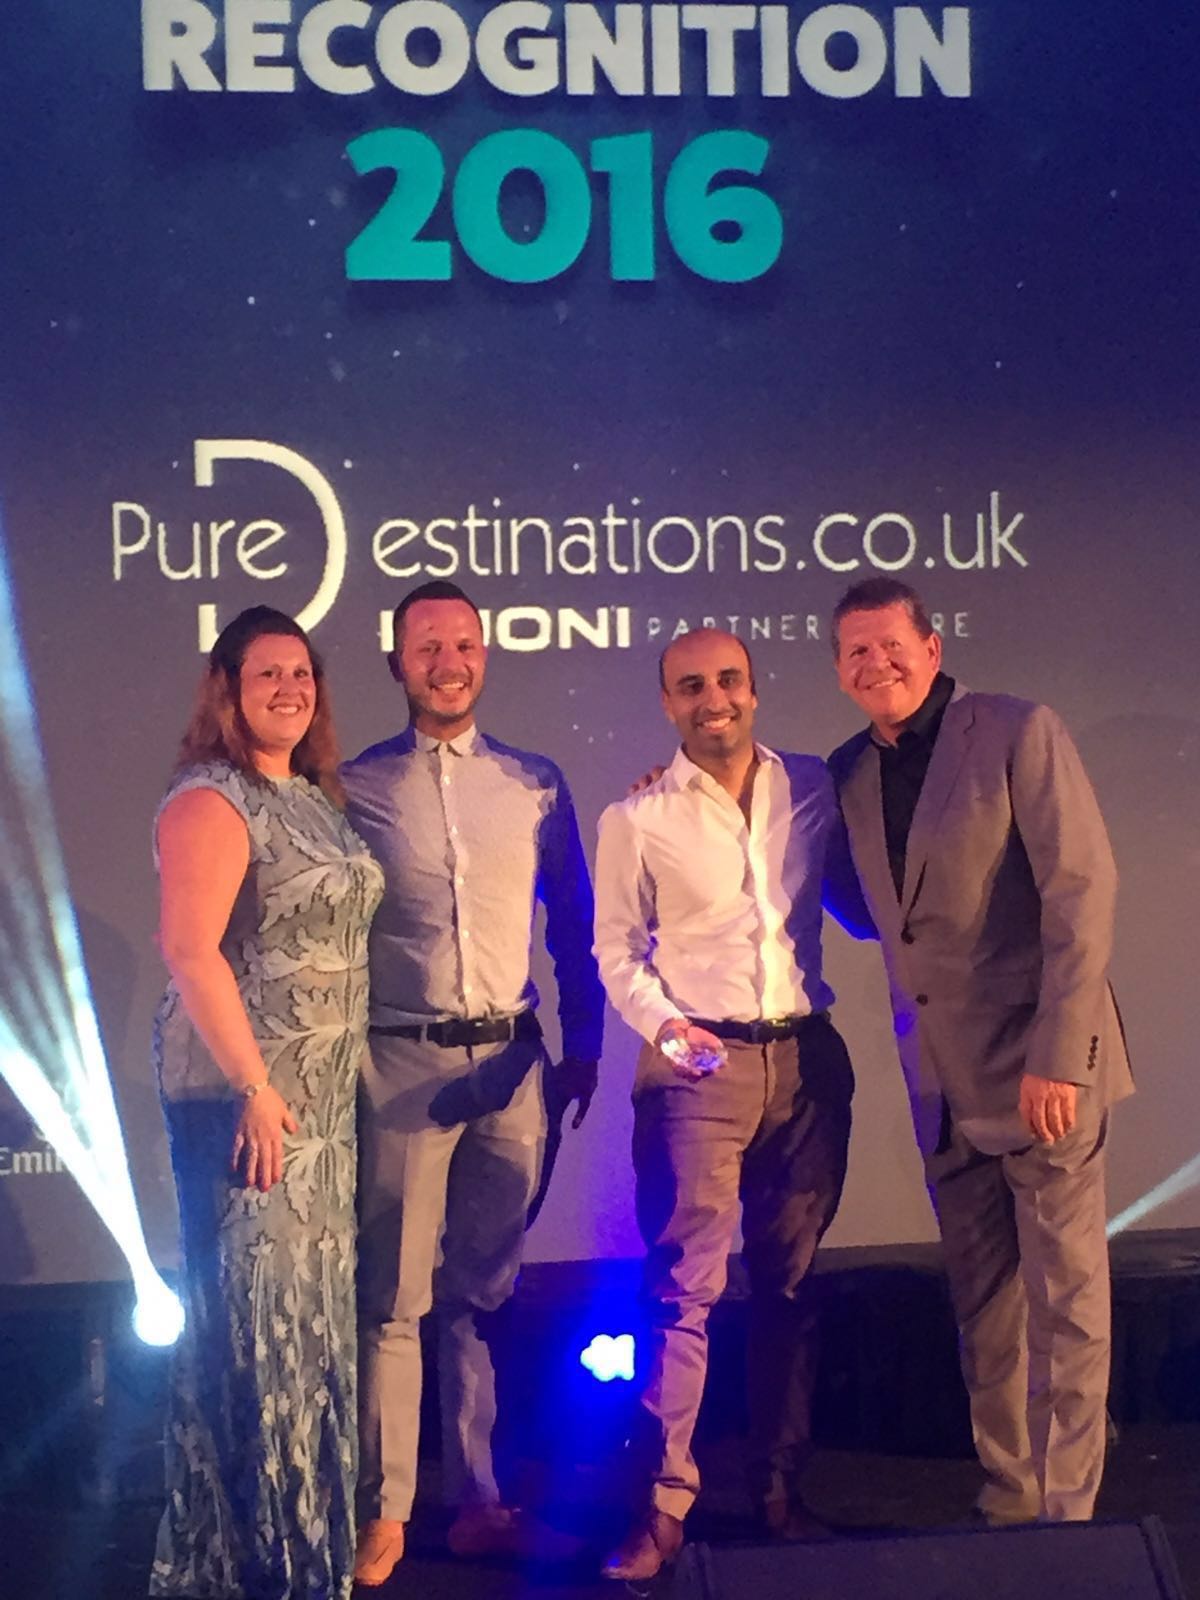 Honeymoon Dreams and Pure Destinations - The Global Conference Dubai 2016 